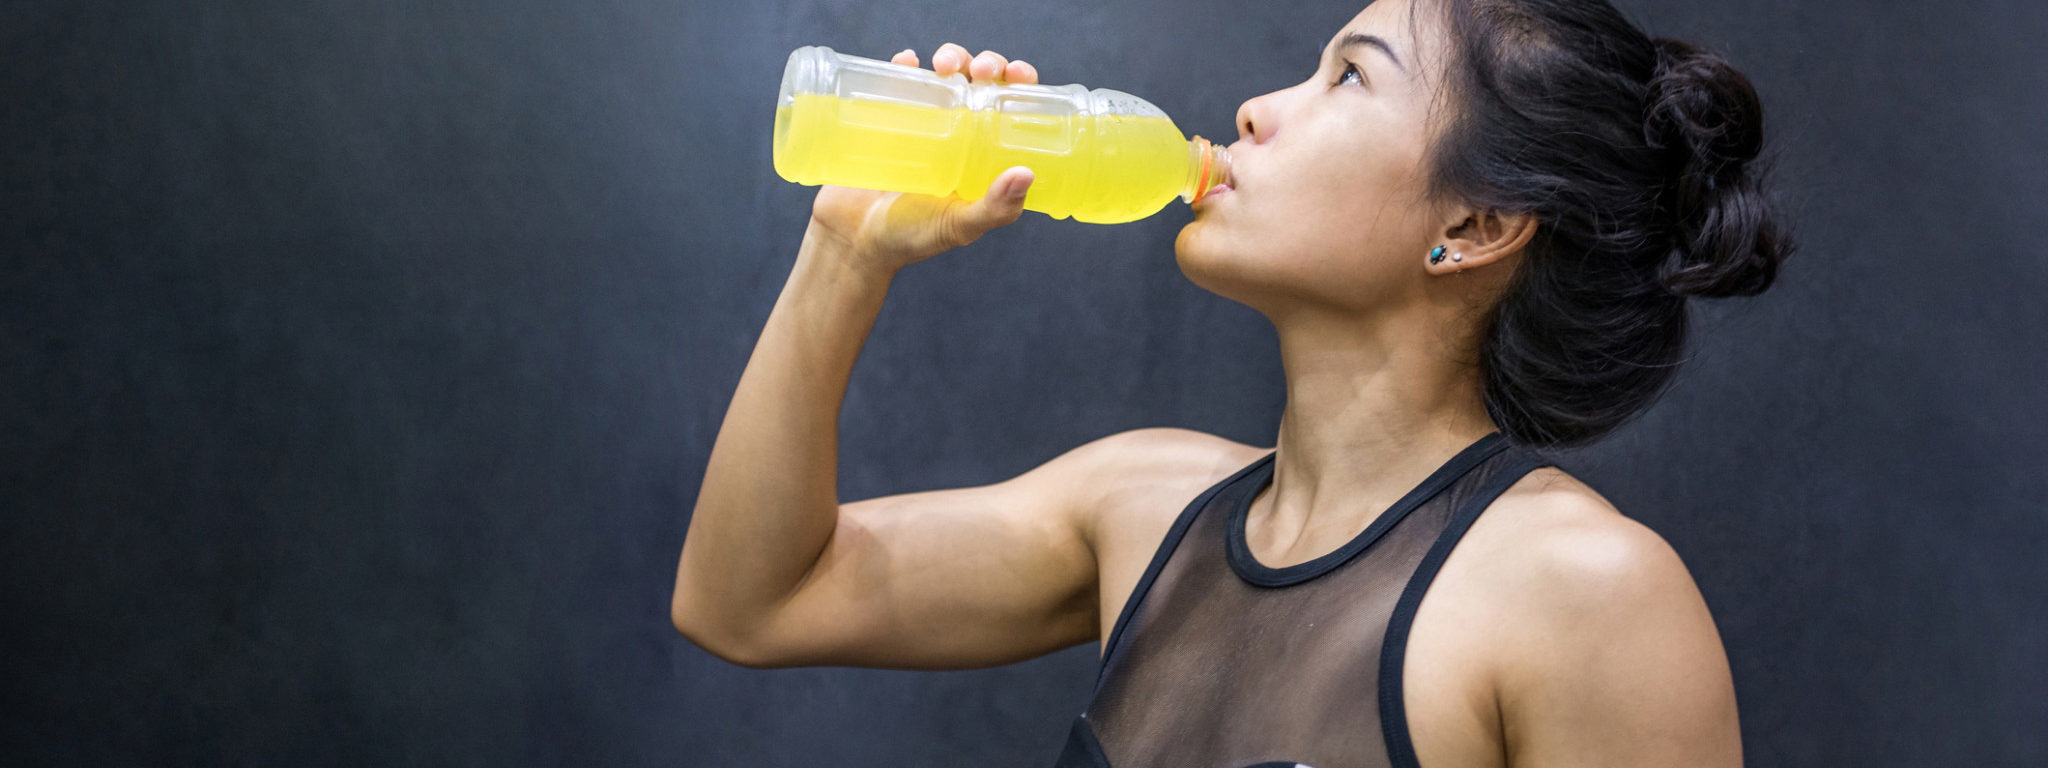 Fluid replacement for young athletes